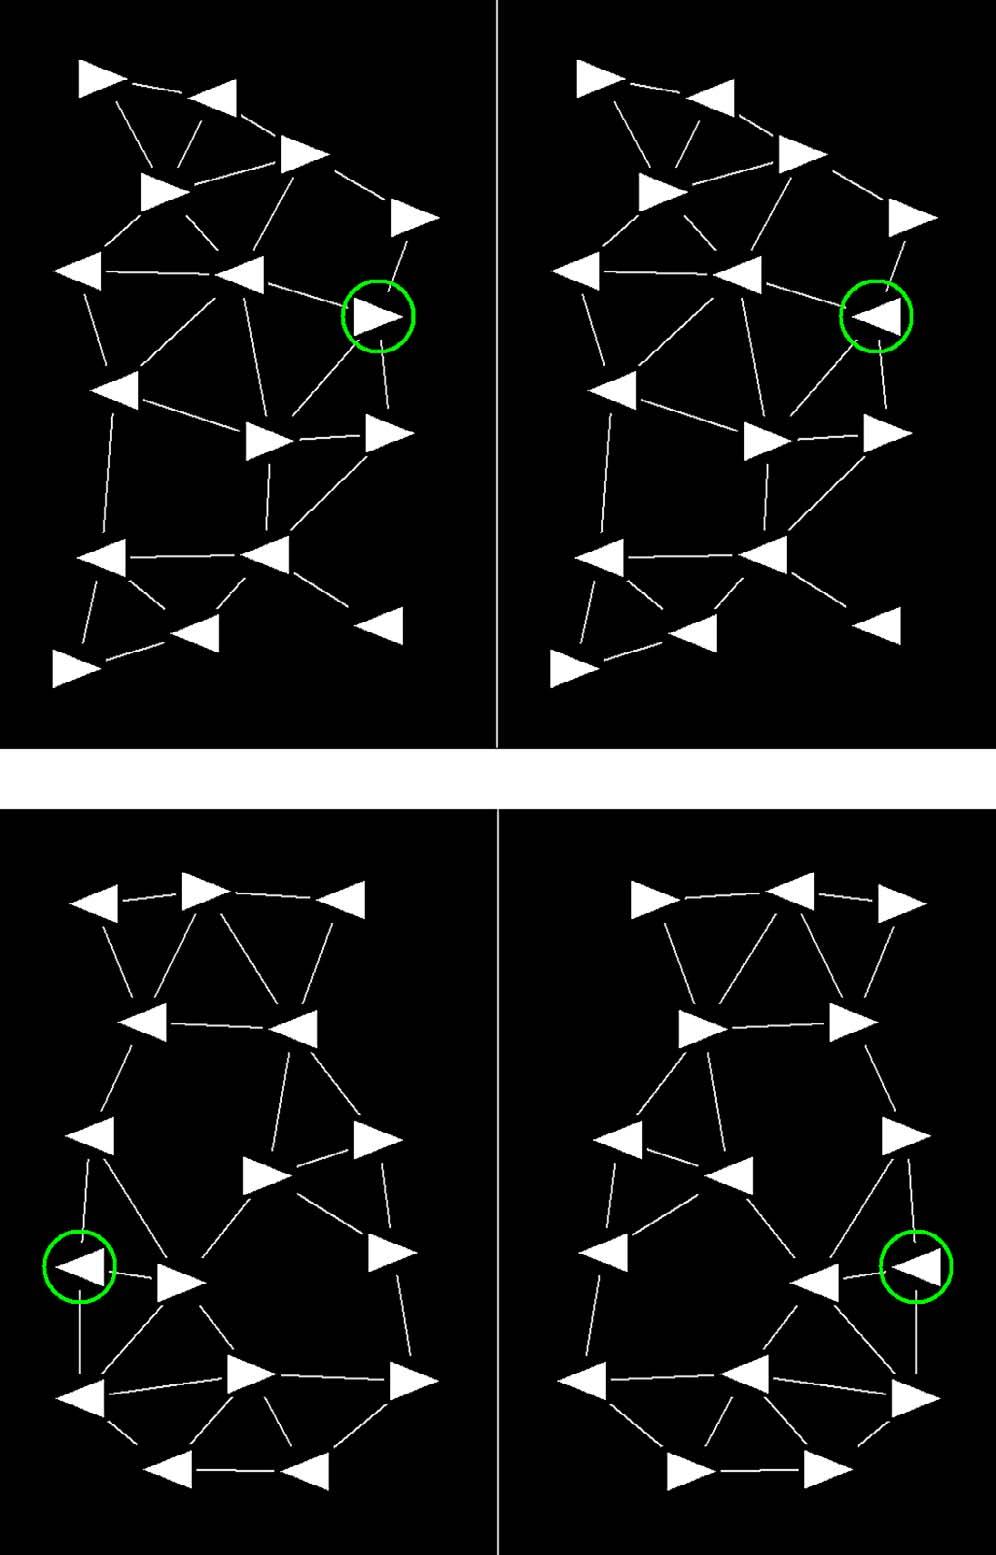 Journal of Vision (2012) 12(7):14, 1 19 Pomplun et al. 4 Figure 1. Example stimuli for the comparative visual search task, with green circles indicating the target objects.